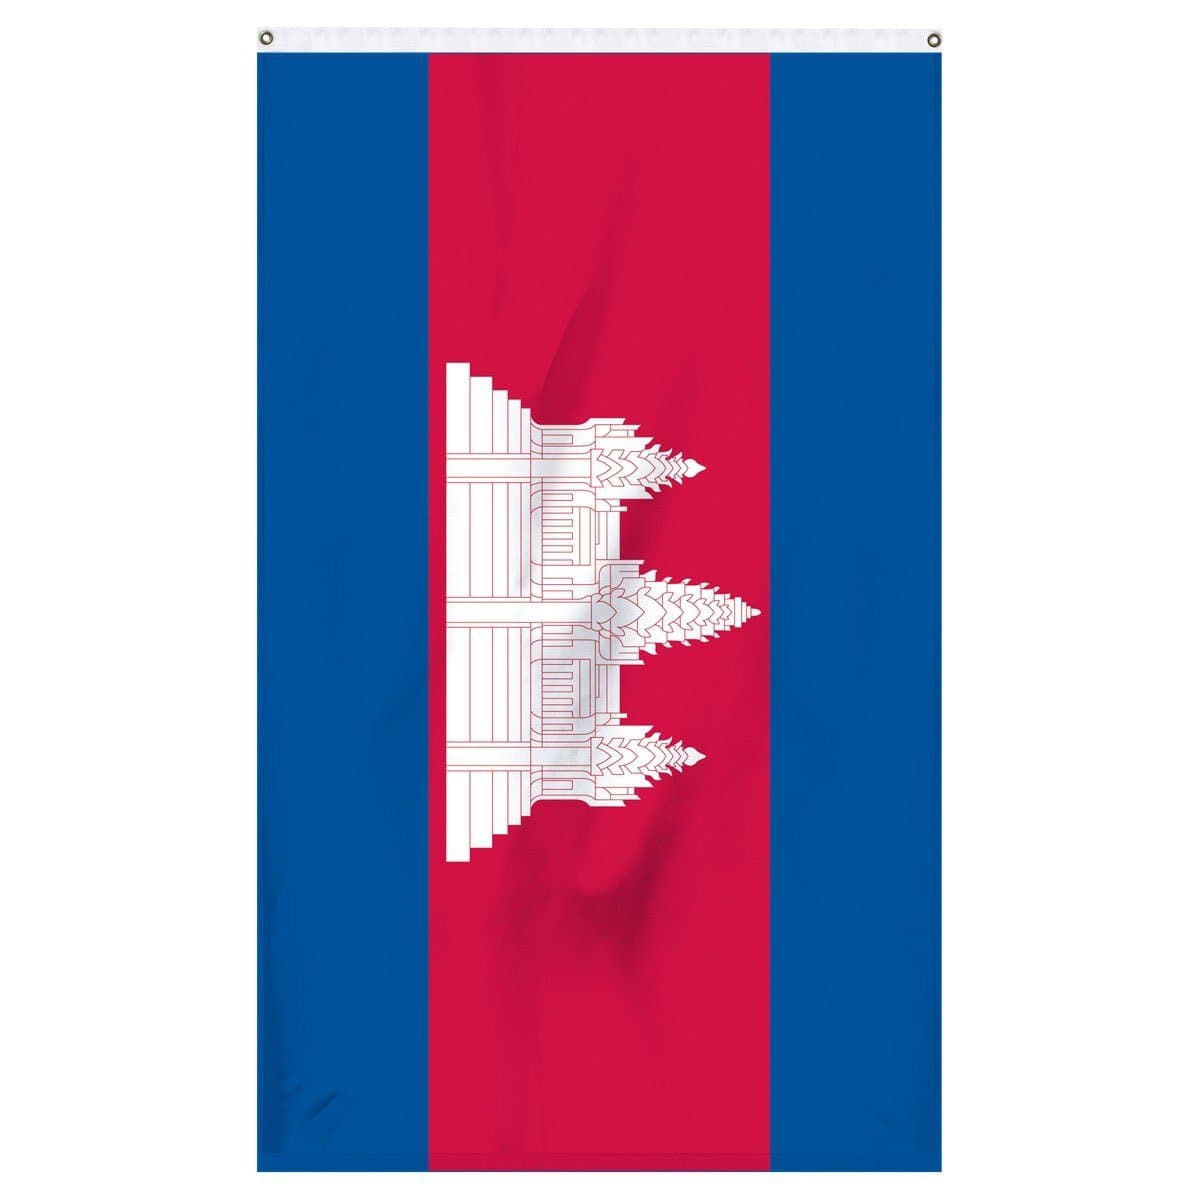 Cambodia international flag for sale for flag collectors or parades or flagpoles